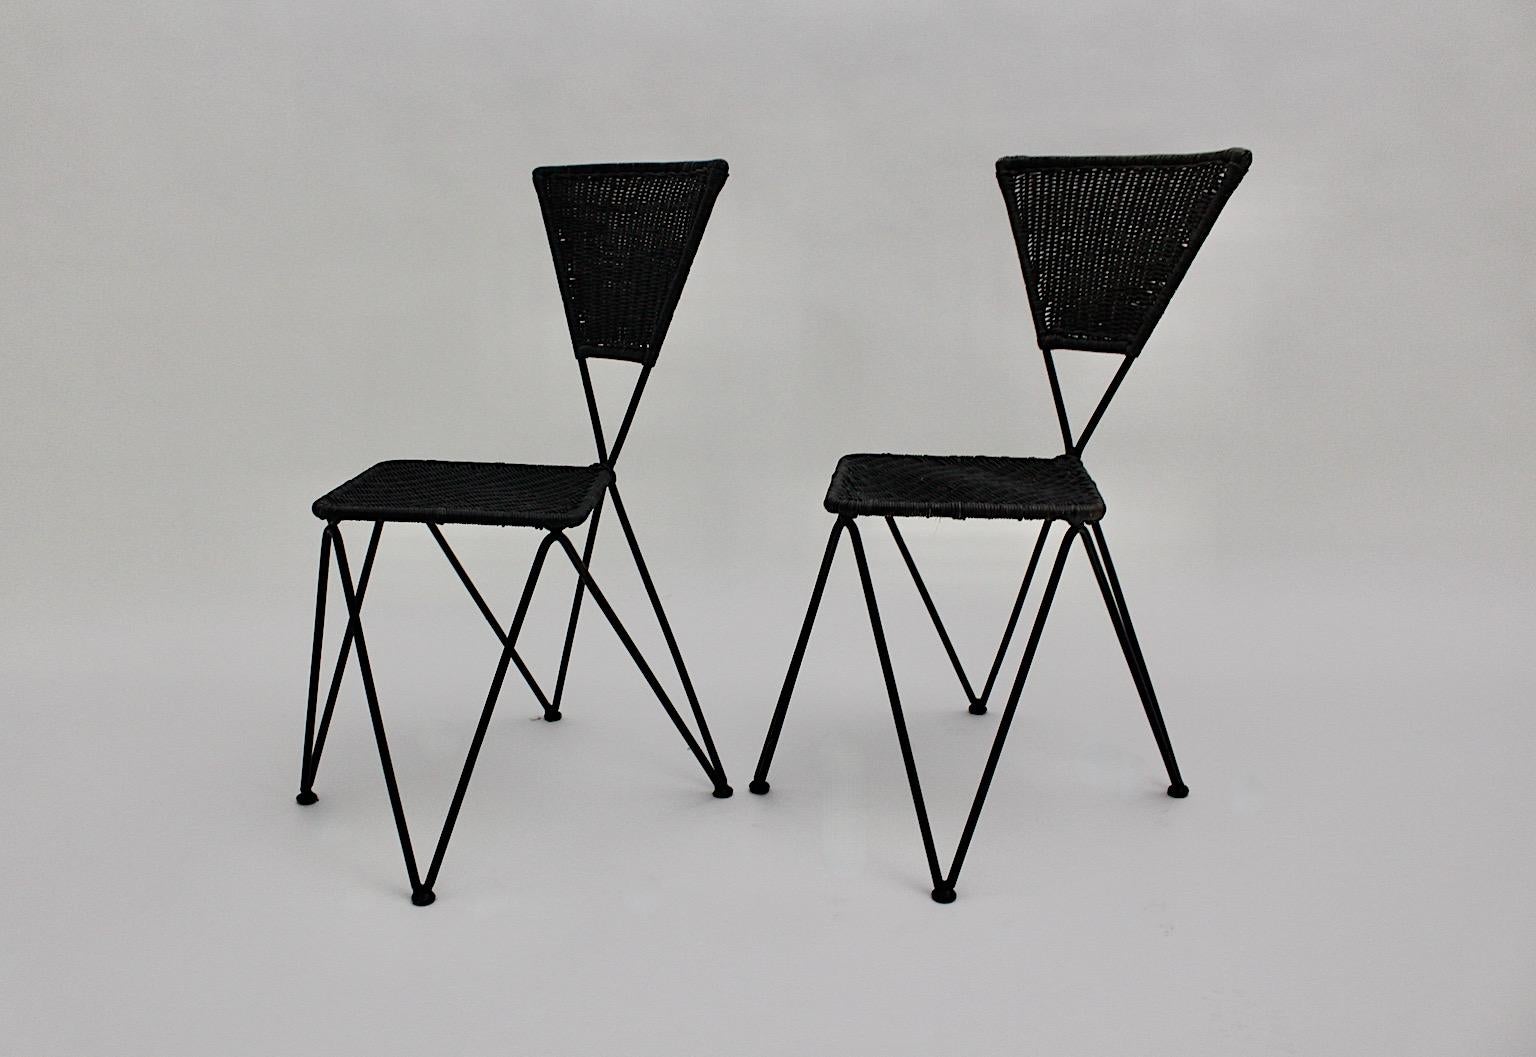 Wicker metal vintage dining chairs or patio chairs duo or pair of set of 2 designed by Karl Fostel Erben and executed by Sonett, Vienna, circa 1950.
The seat frame was made out of black lacquered iron, while the seat and back were dark blue